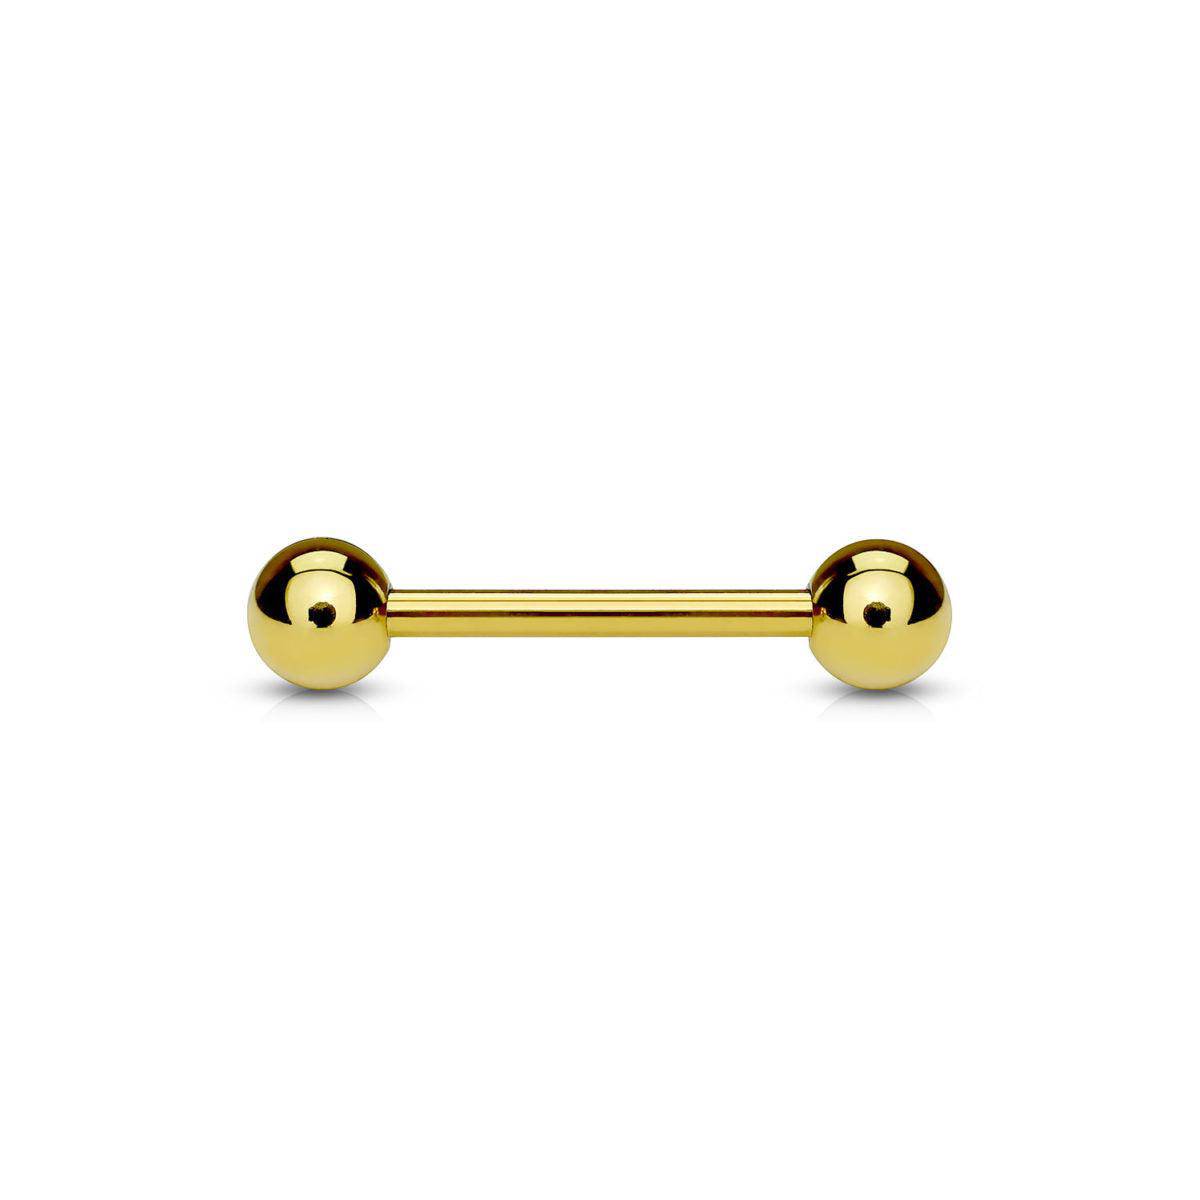 Gold Plated Over Steel Barbell - 14G